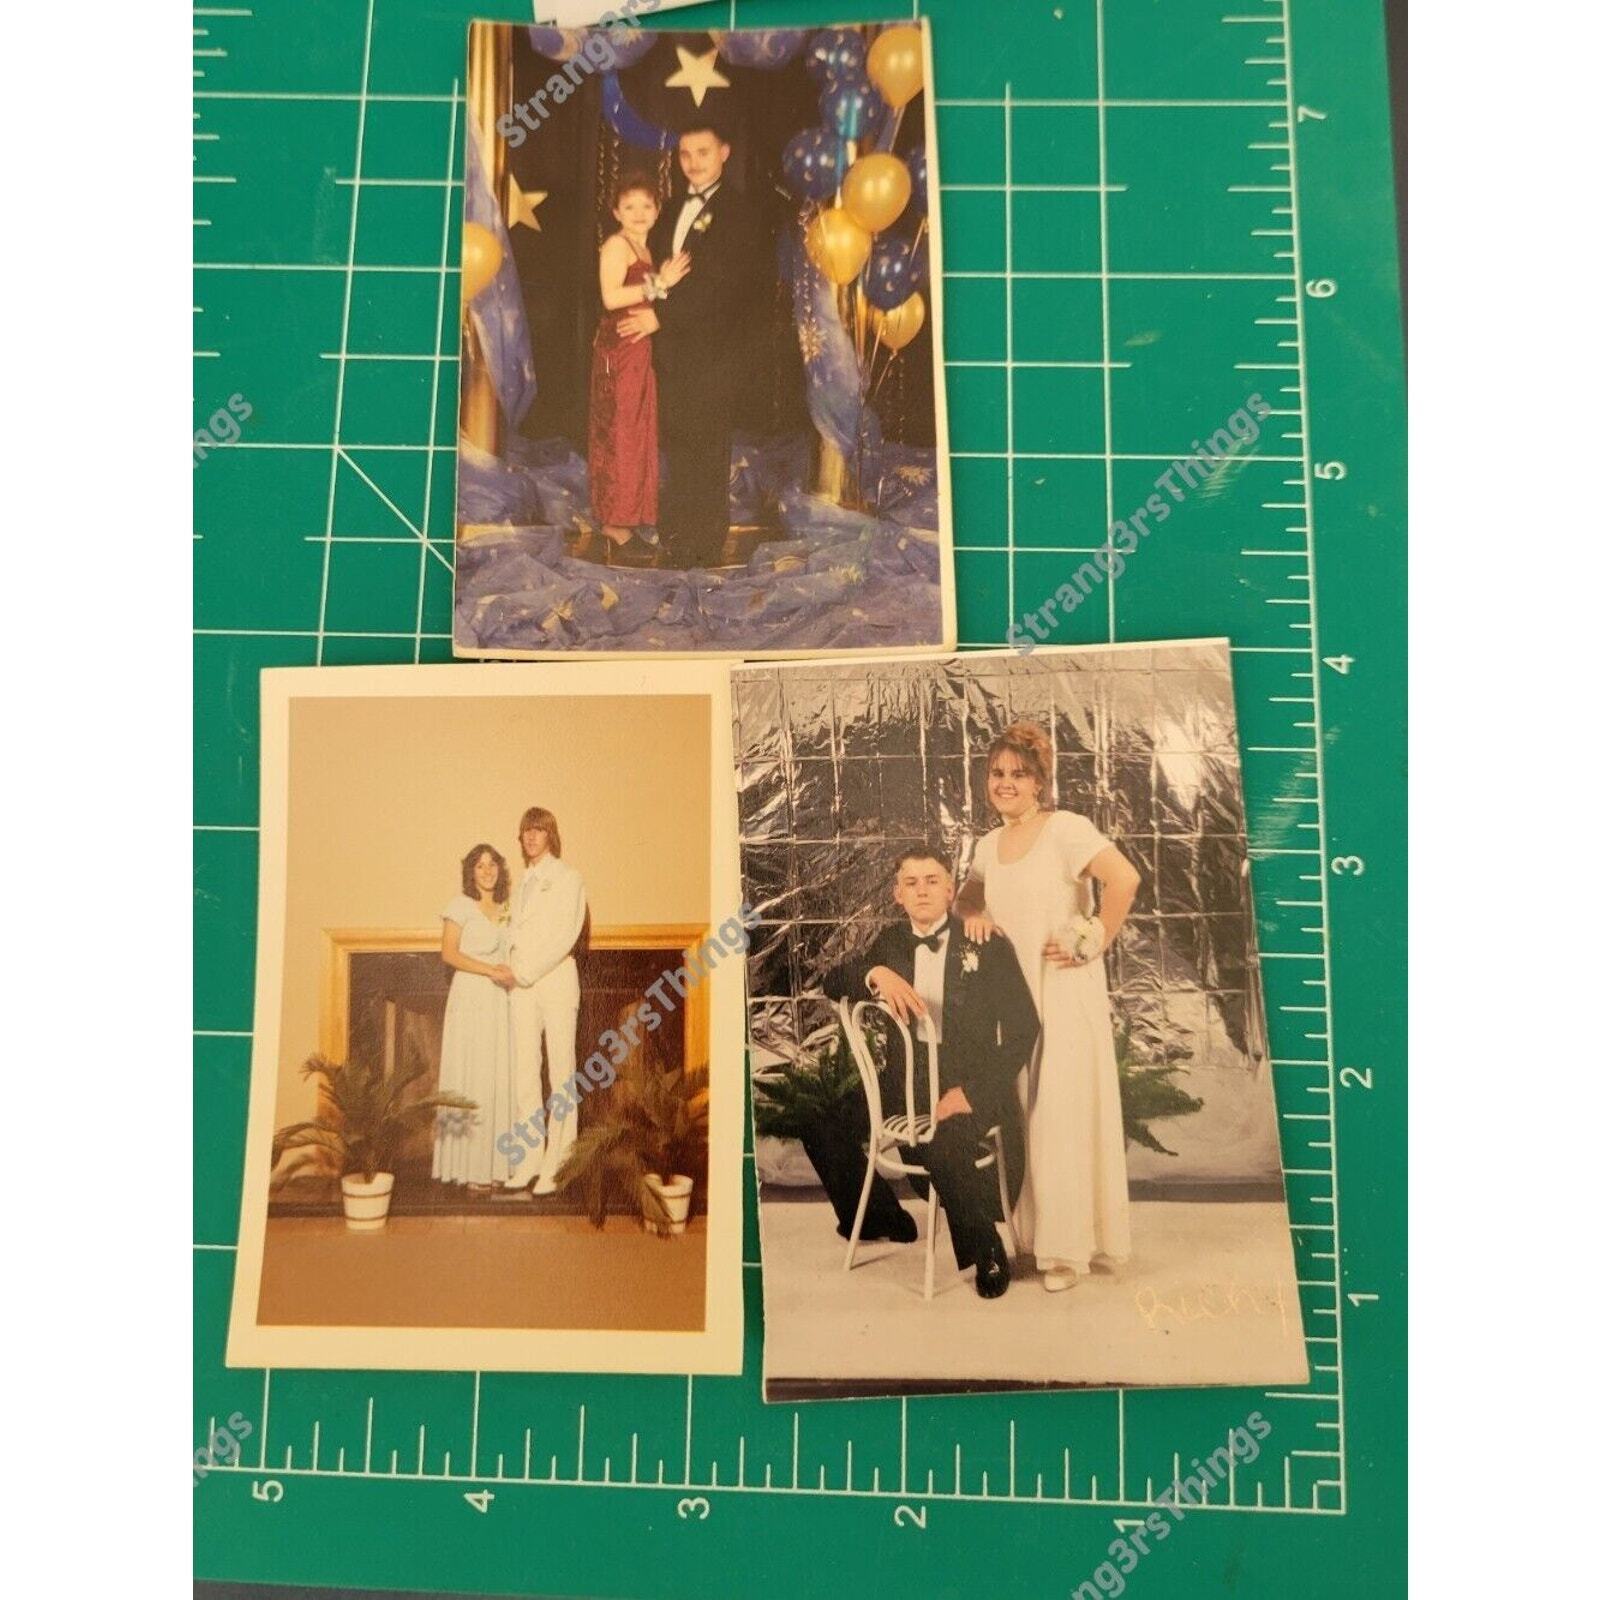 FOUND PHOTOGRAPH Color PROM COUPLES Original VINTAGE lot of 3 1970s 1990s